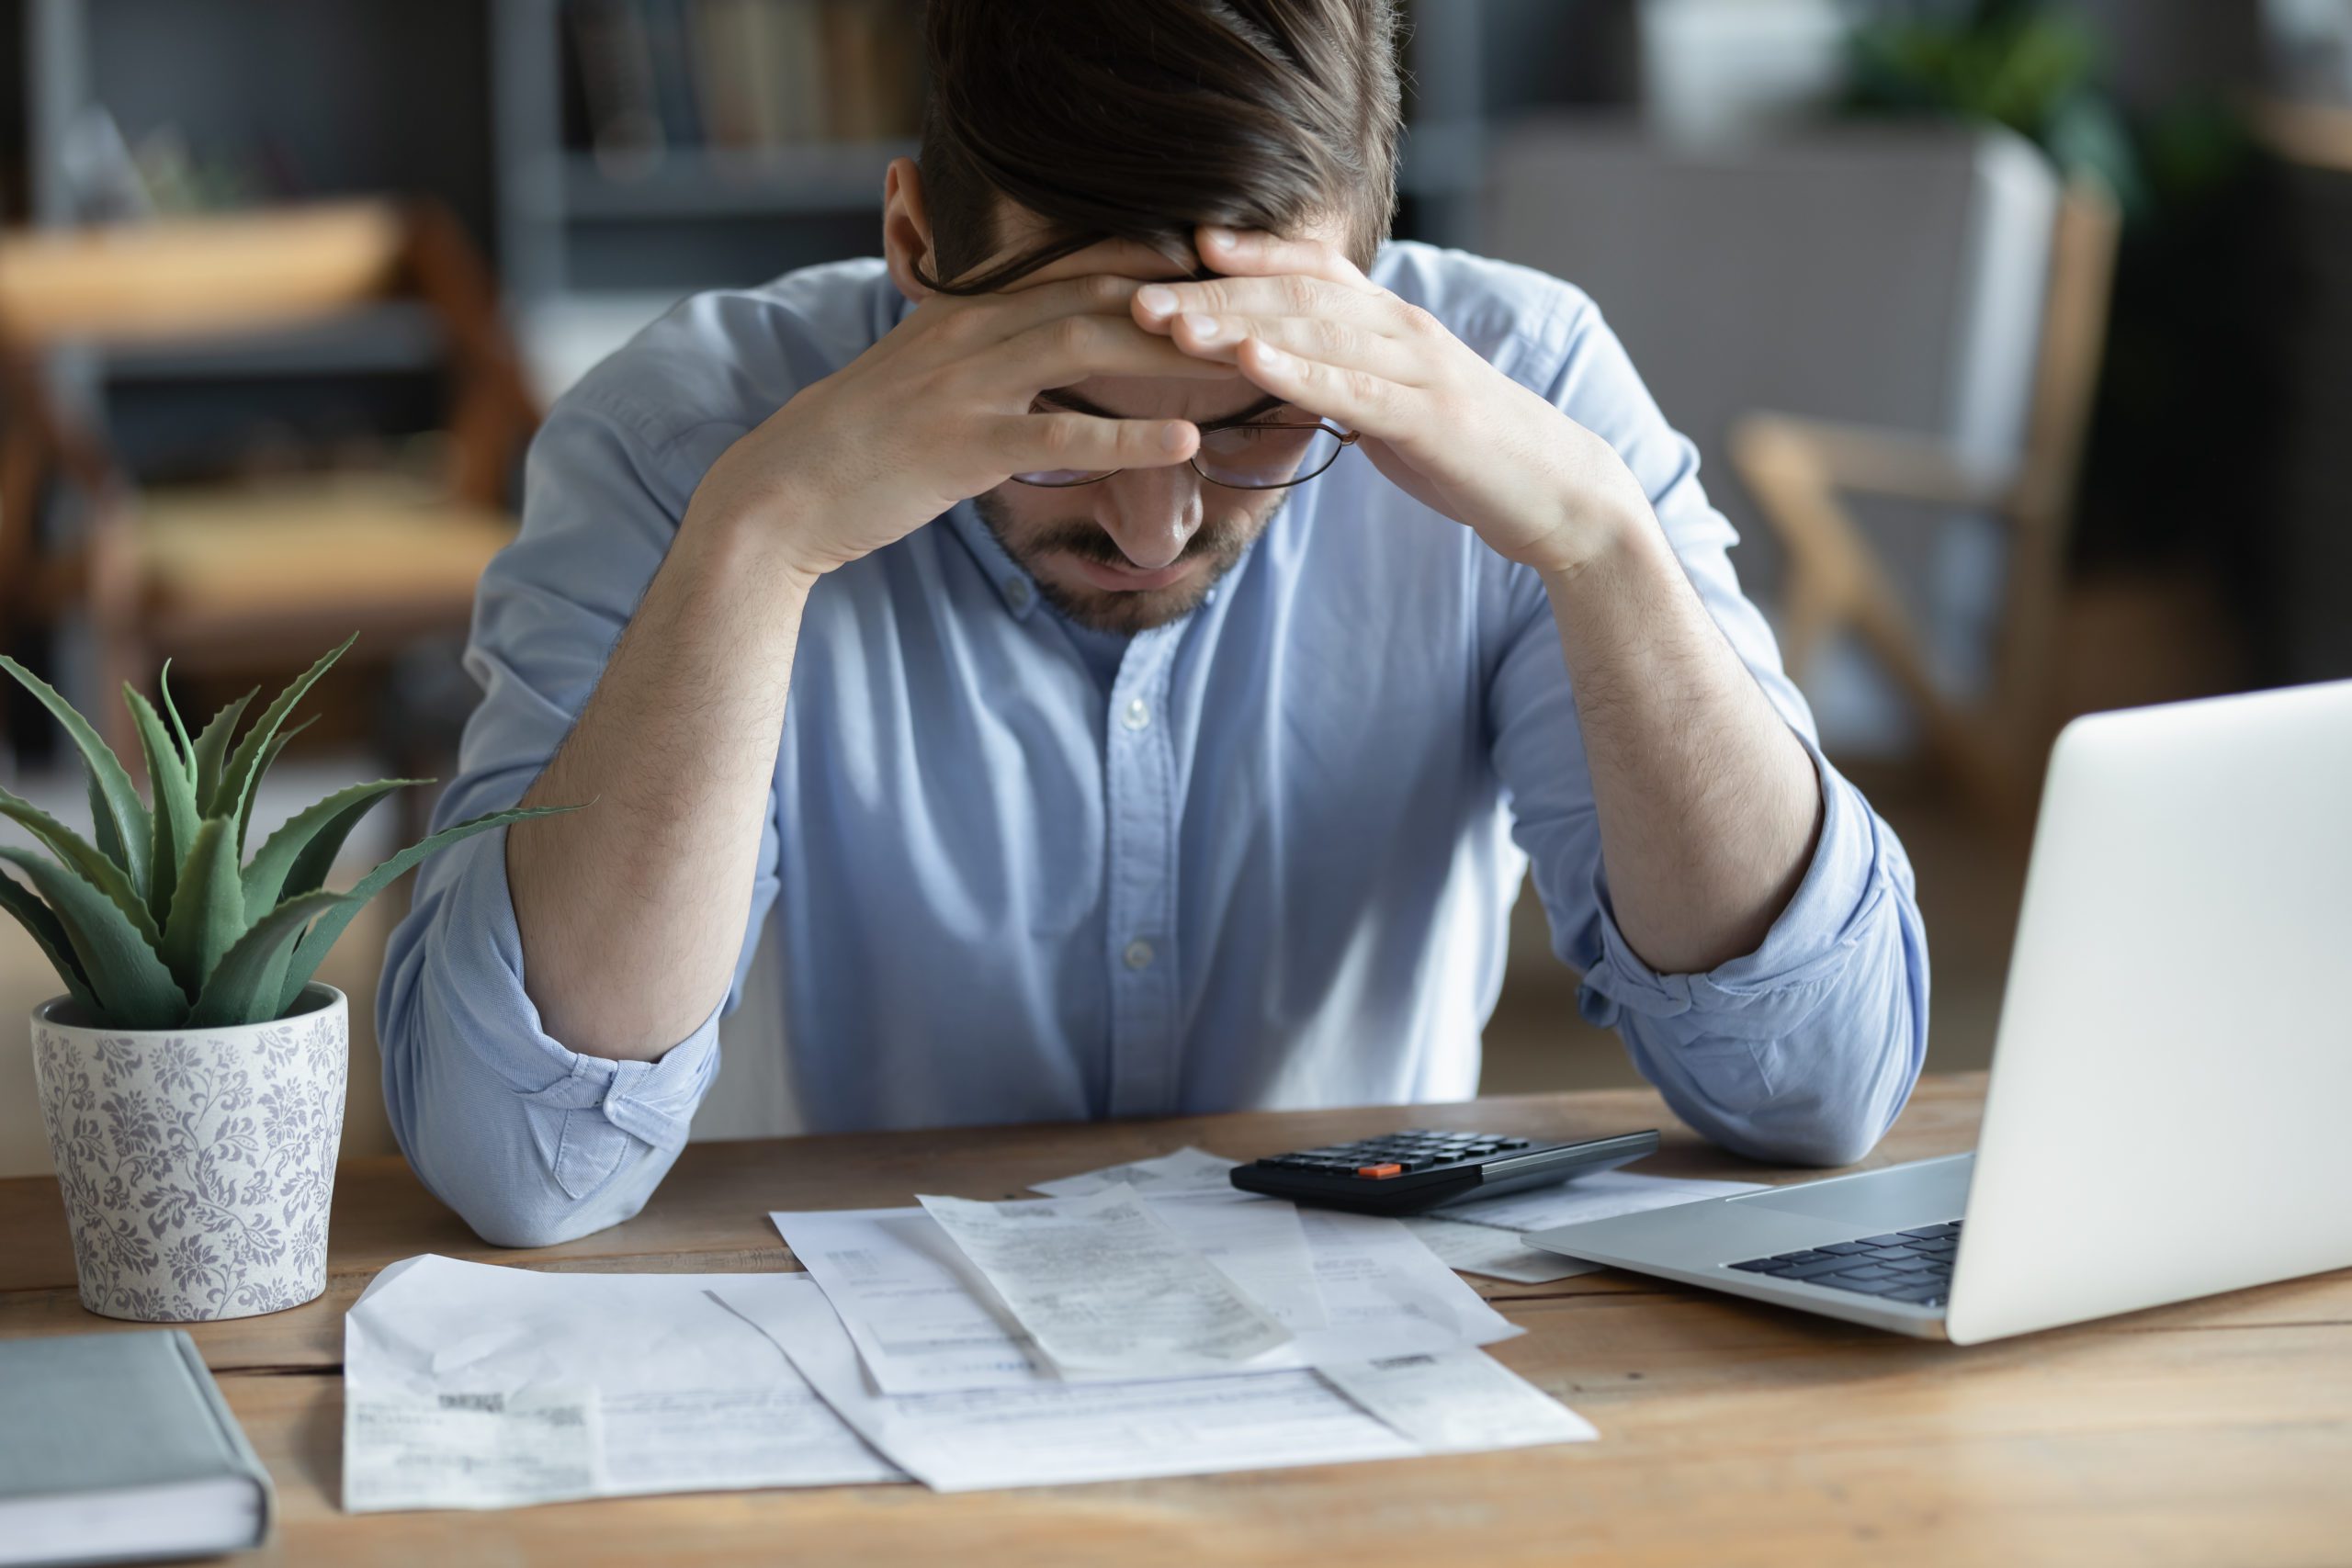 Ways to Relieve Anxiety from Debt